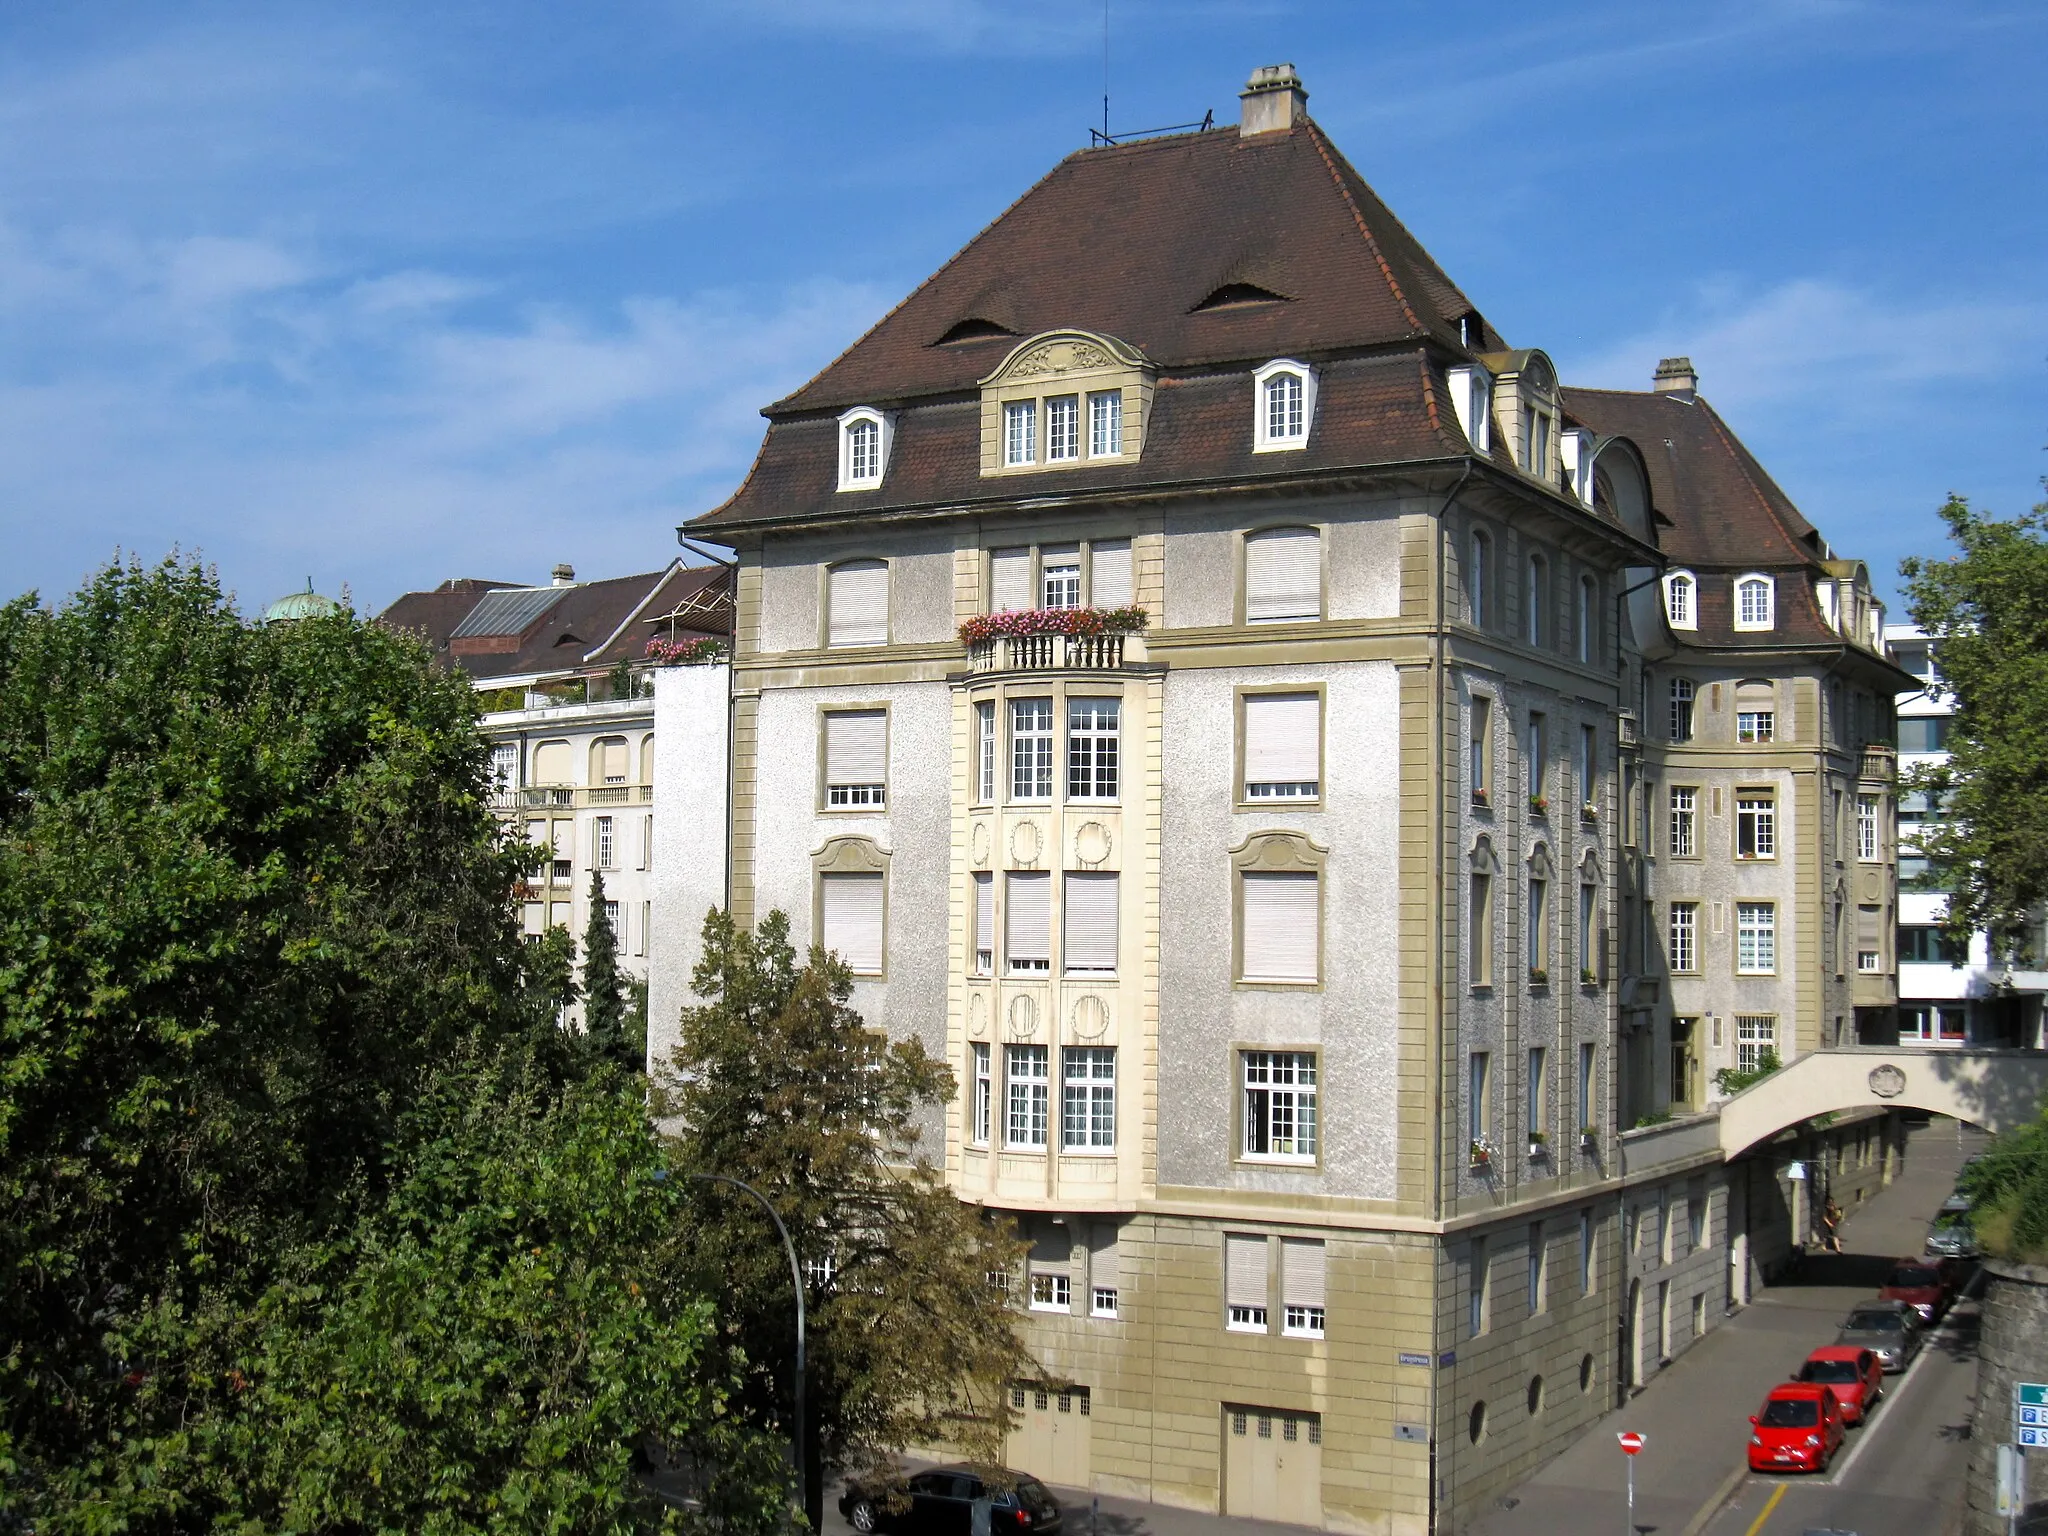 Photo showing: "Am Viadukt" in Basel, constructed by Rudolf Linder (1849-1928) in 1911-15.